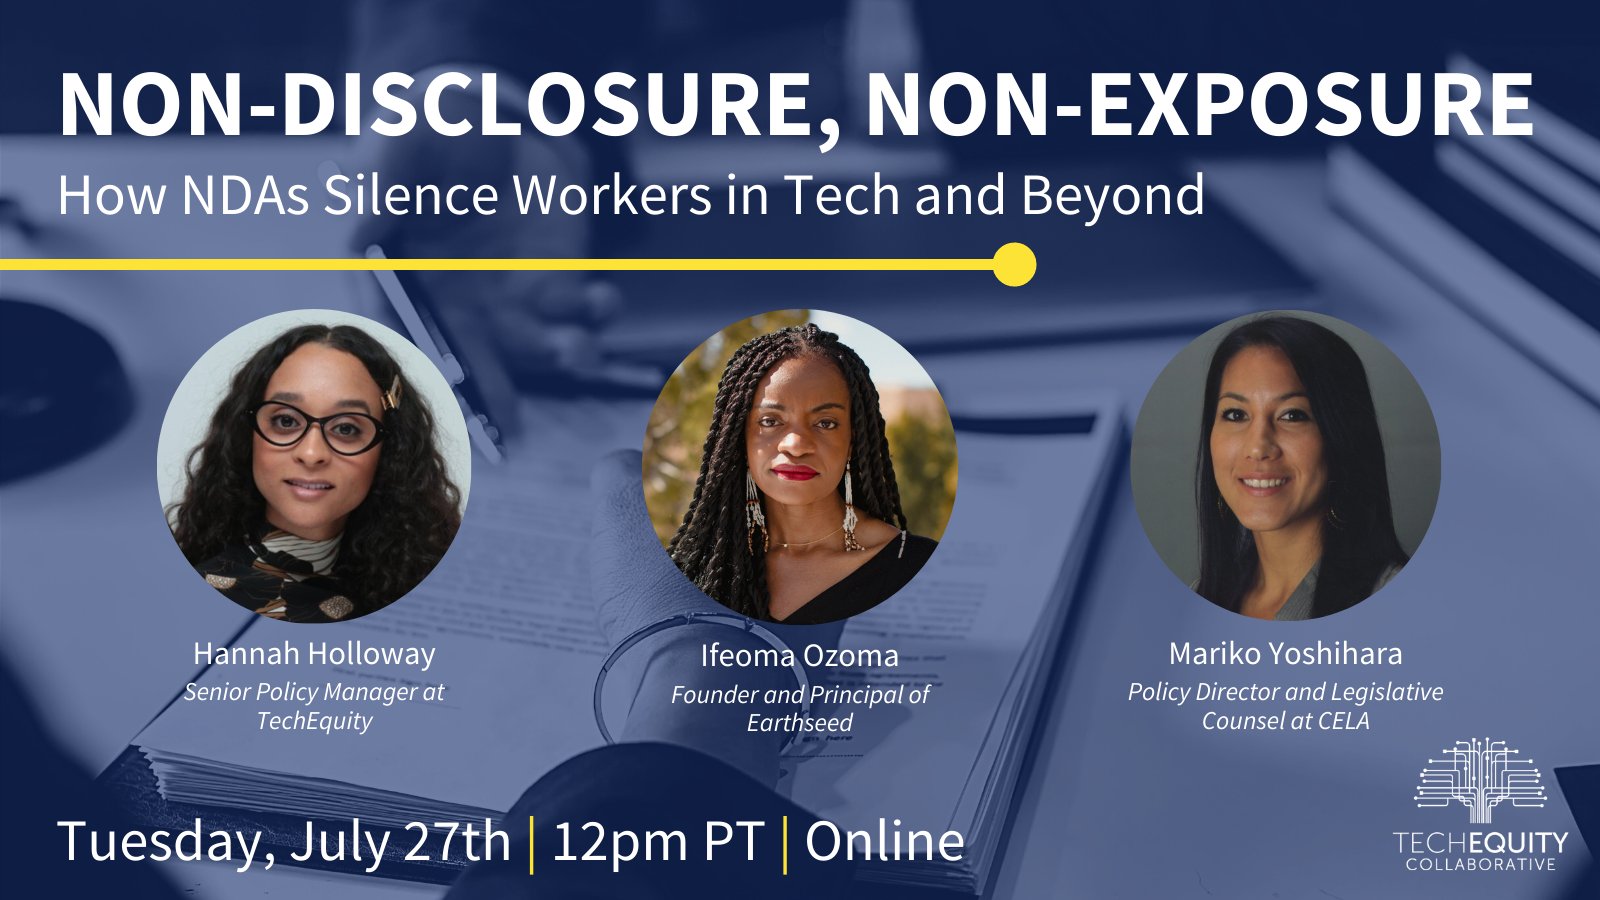 Non-Disclosure, Non-Exposure: How NDAs Silence Workers in Tech and Beyond